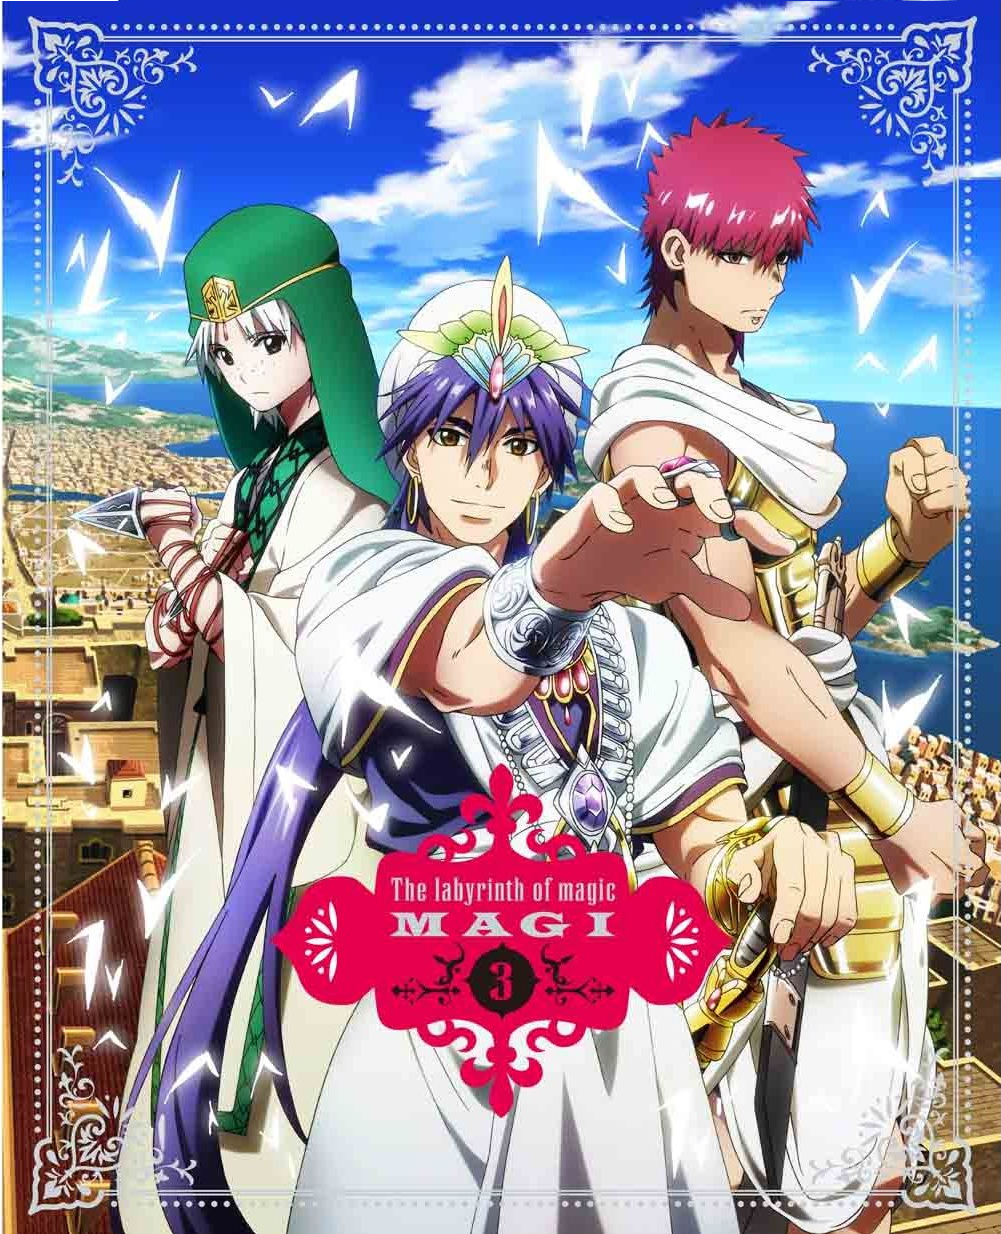 Magi The Labyrinth of Magic Vol 2  Book by Shinobu Ohtaka  Official  Publisher Page  Simon  Schuster